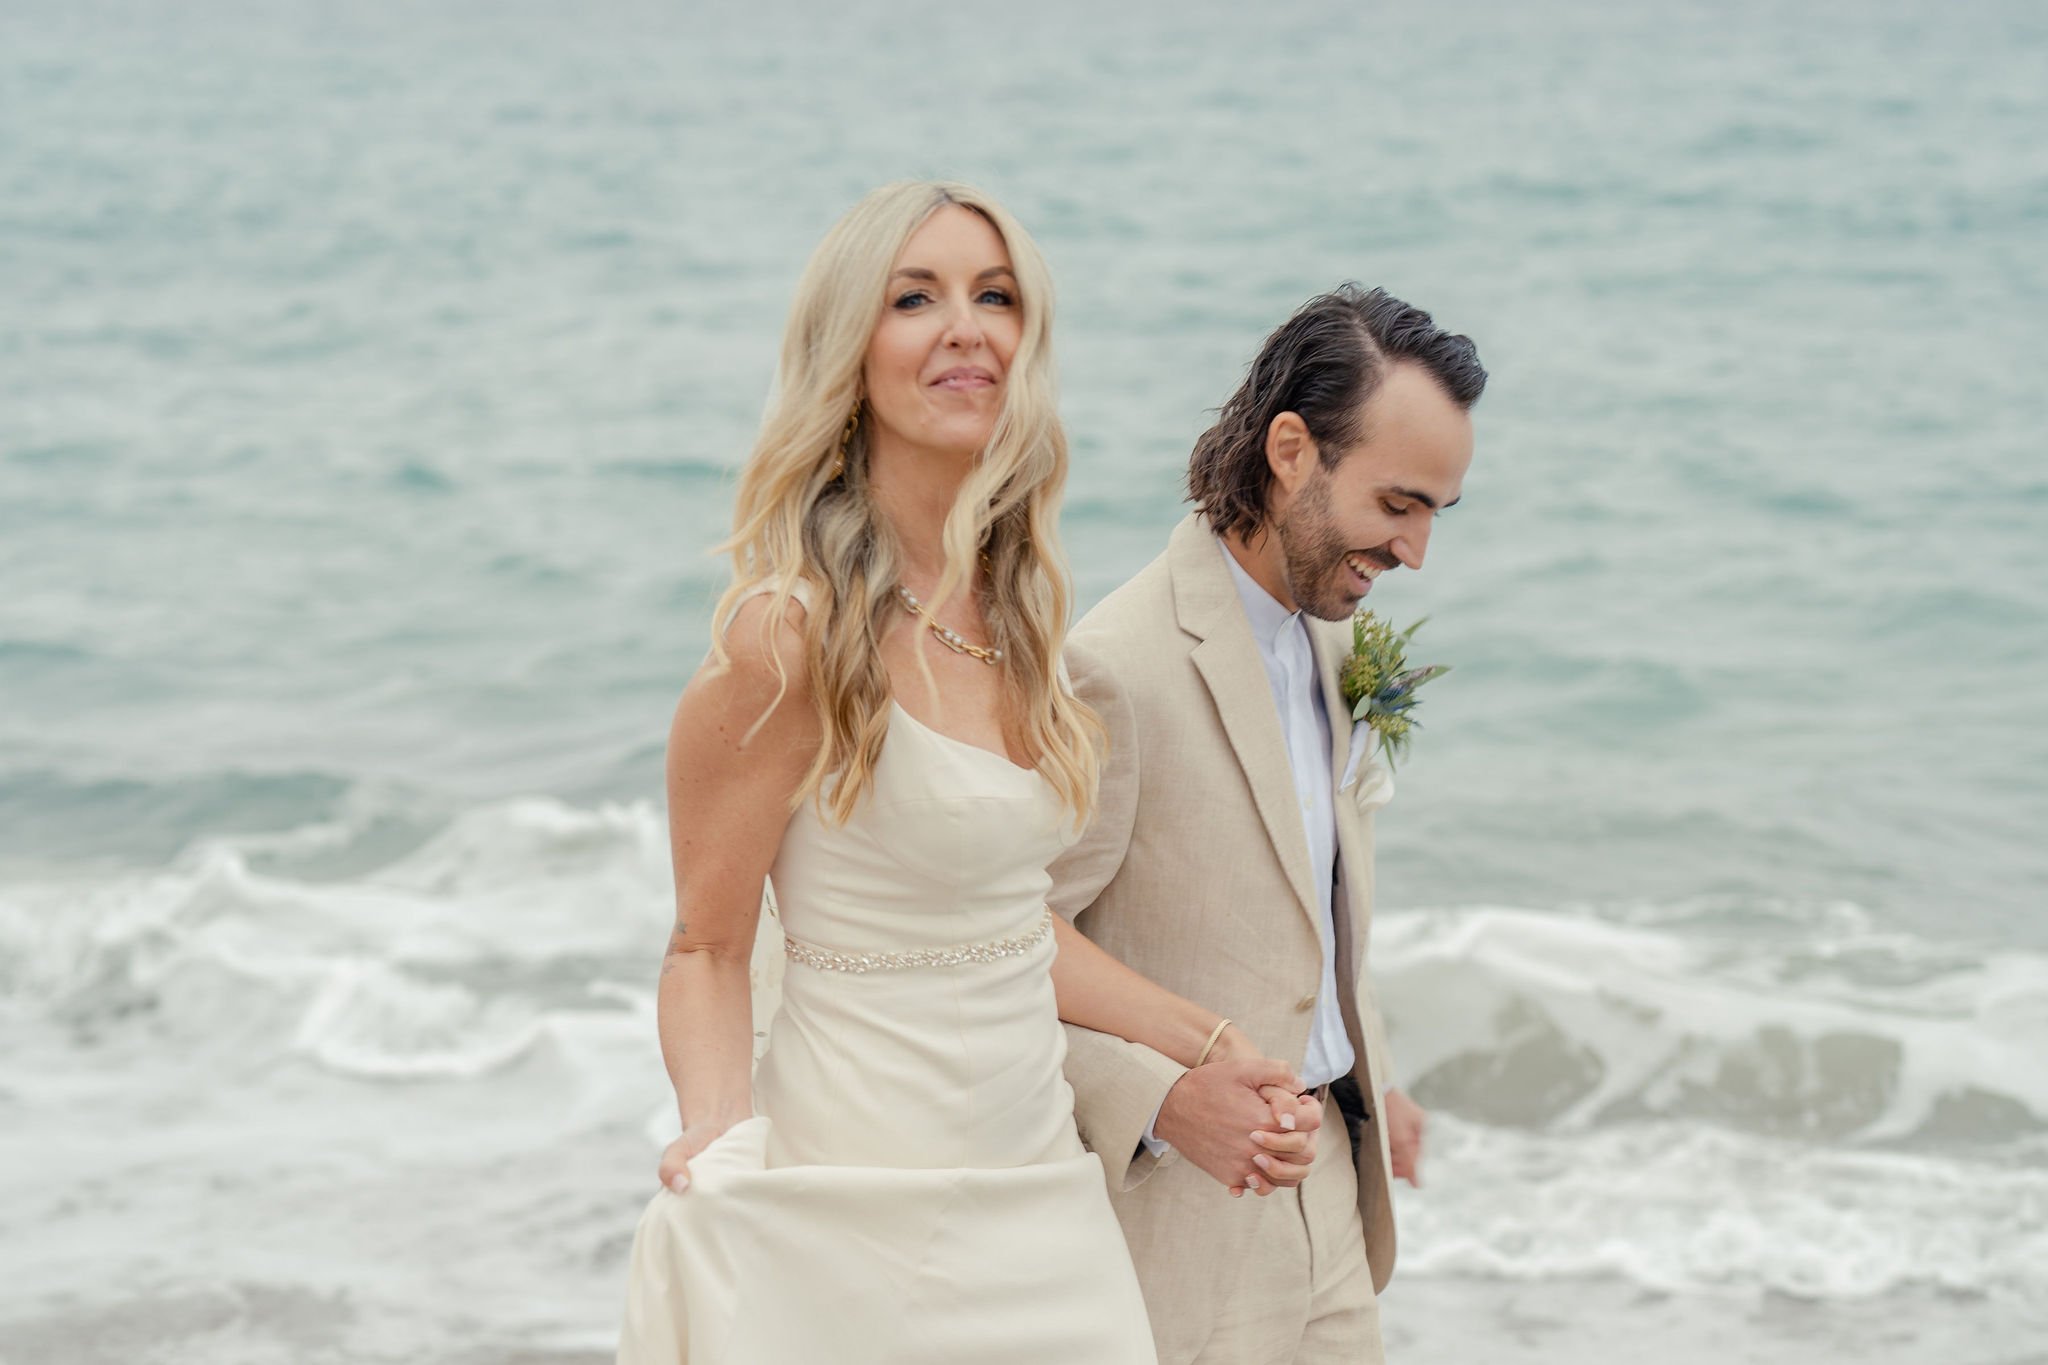 founder, podcast host, and manifestation coach plans wedding ceremony along the cliffs of point dume beach in california